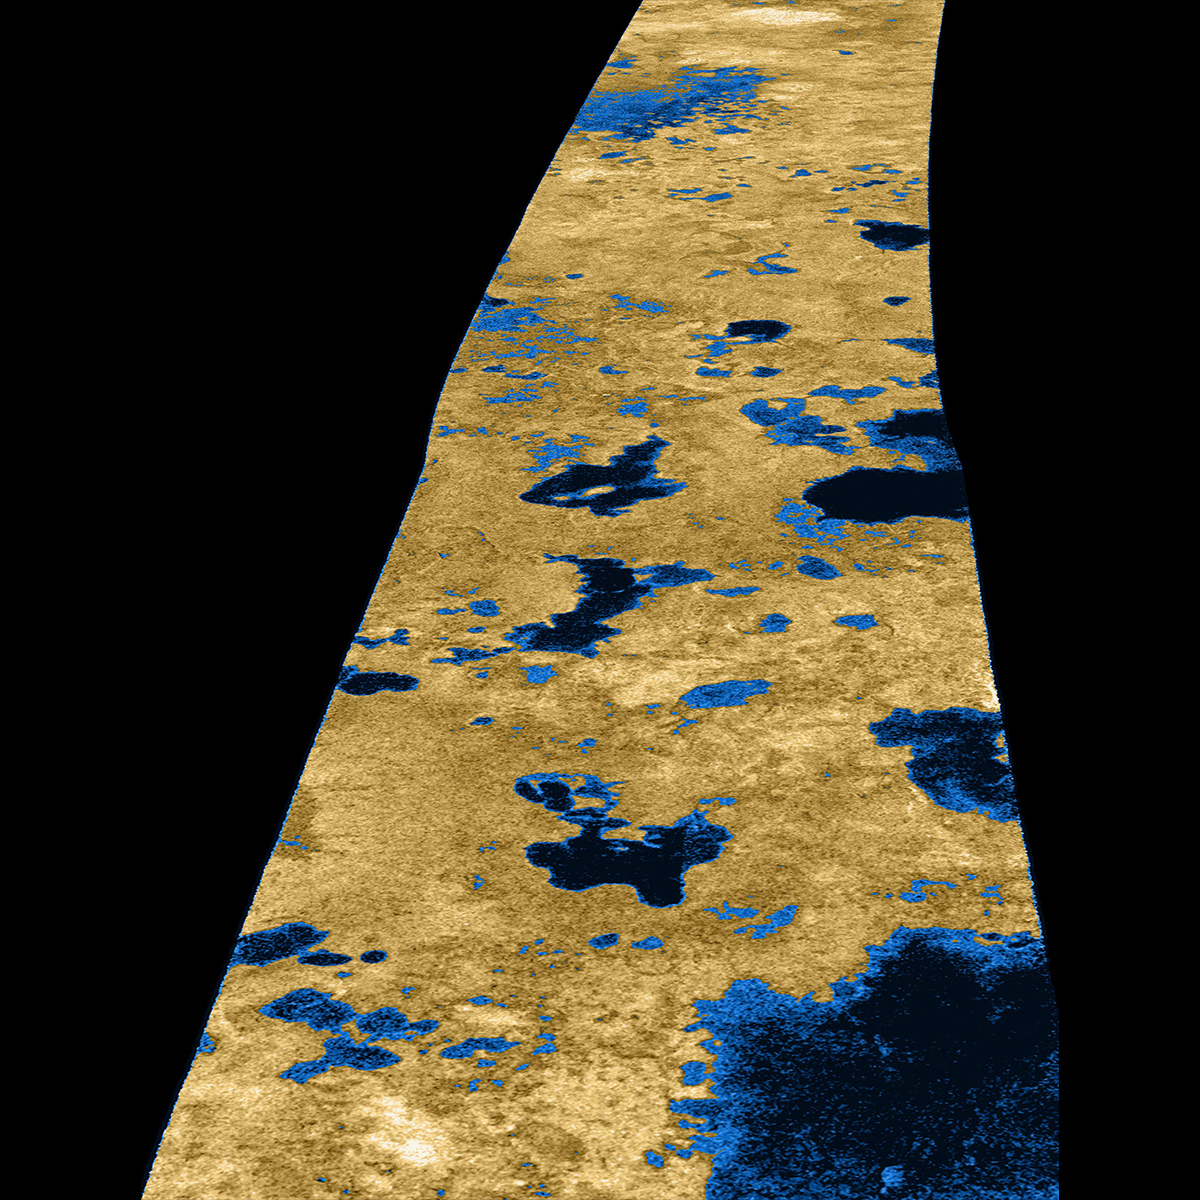 The existence of oceans or lakes of liquid methane on Saturn's moon Titan was predicted more than 20 years ago. 